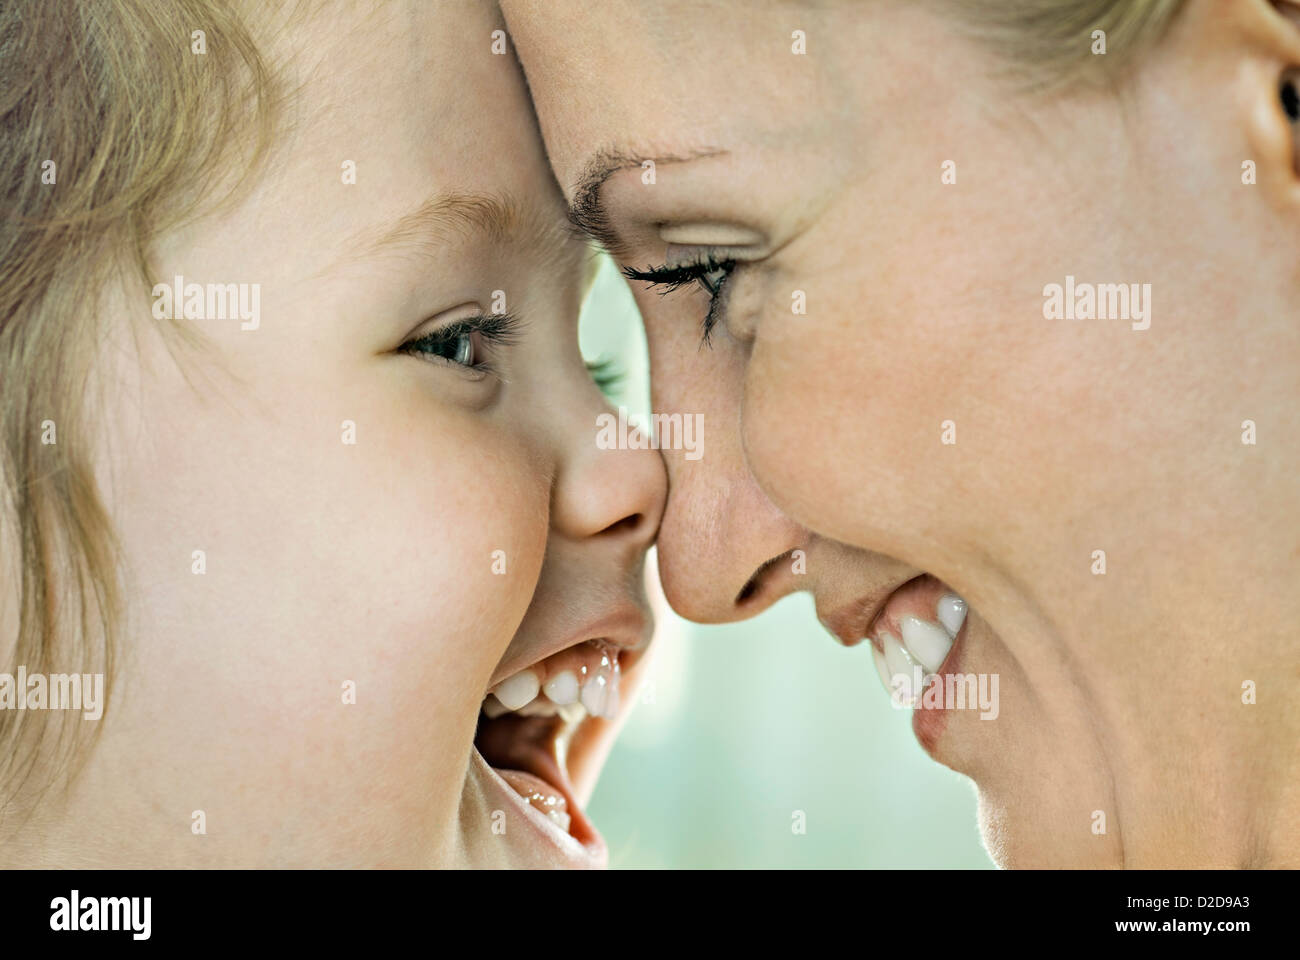 A laughing girl touching noses with her smiling mother, close-up Stock Photo